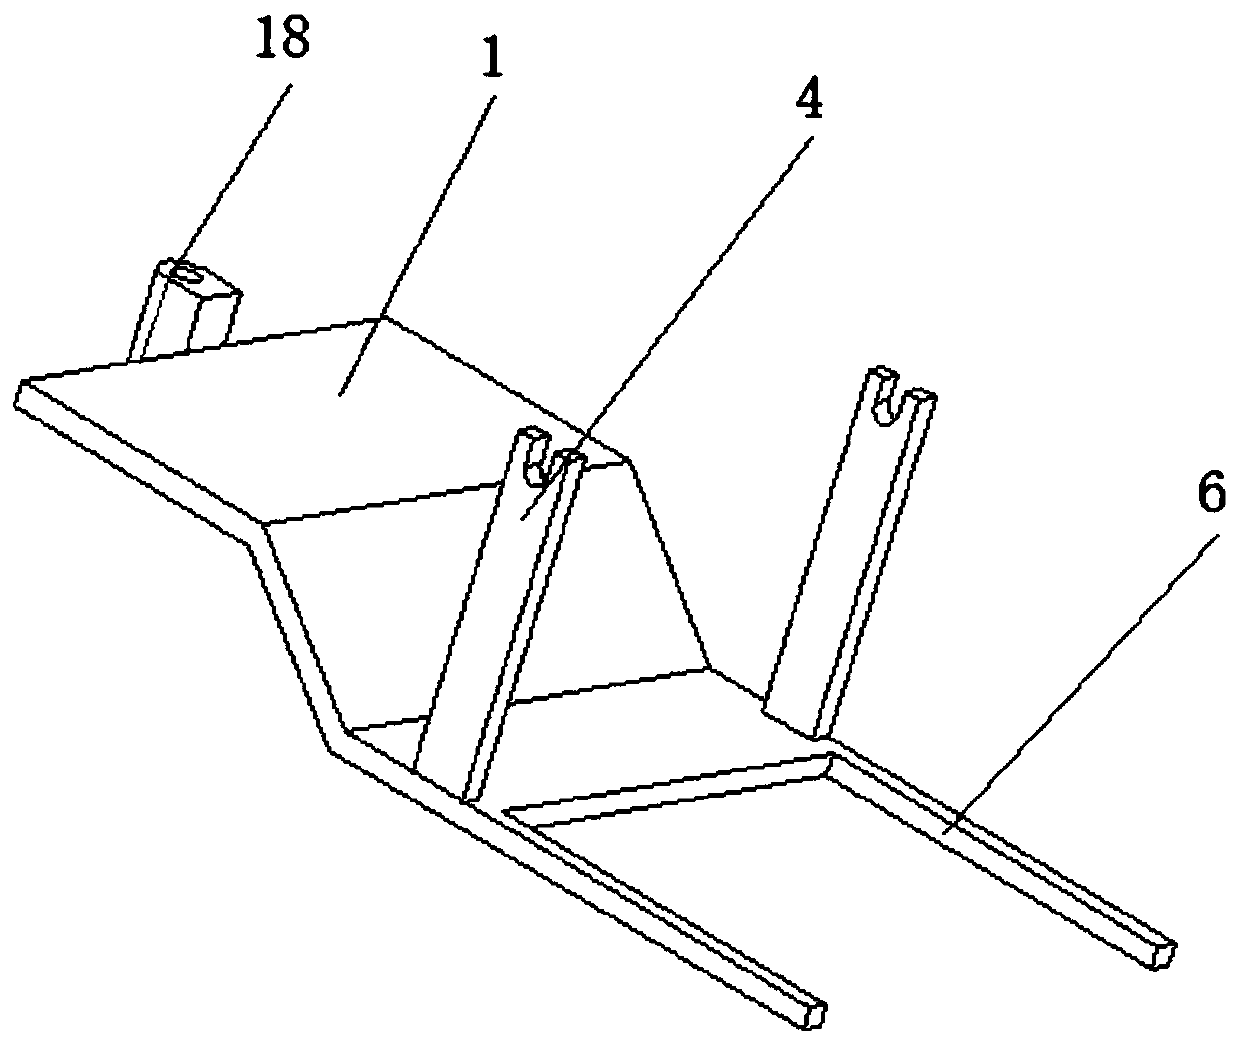 Mulching film laying device for agricultural production